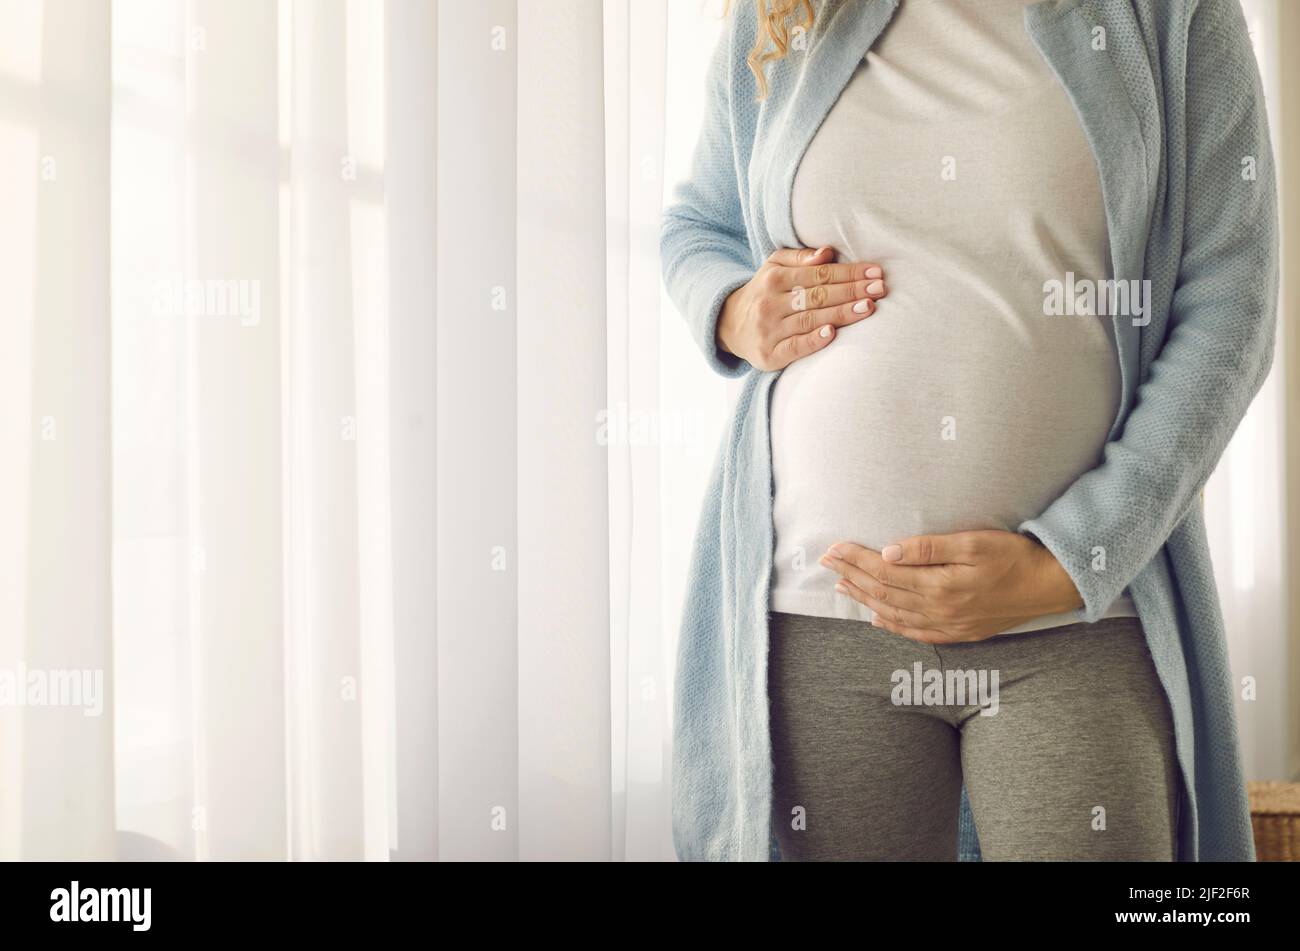 Tummy of pregnant woman who gently supports him with her hands in anticipation of meeting baby. Stock Photo